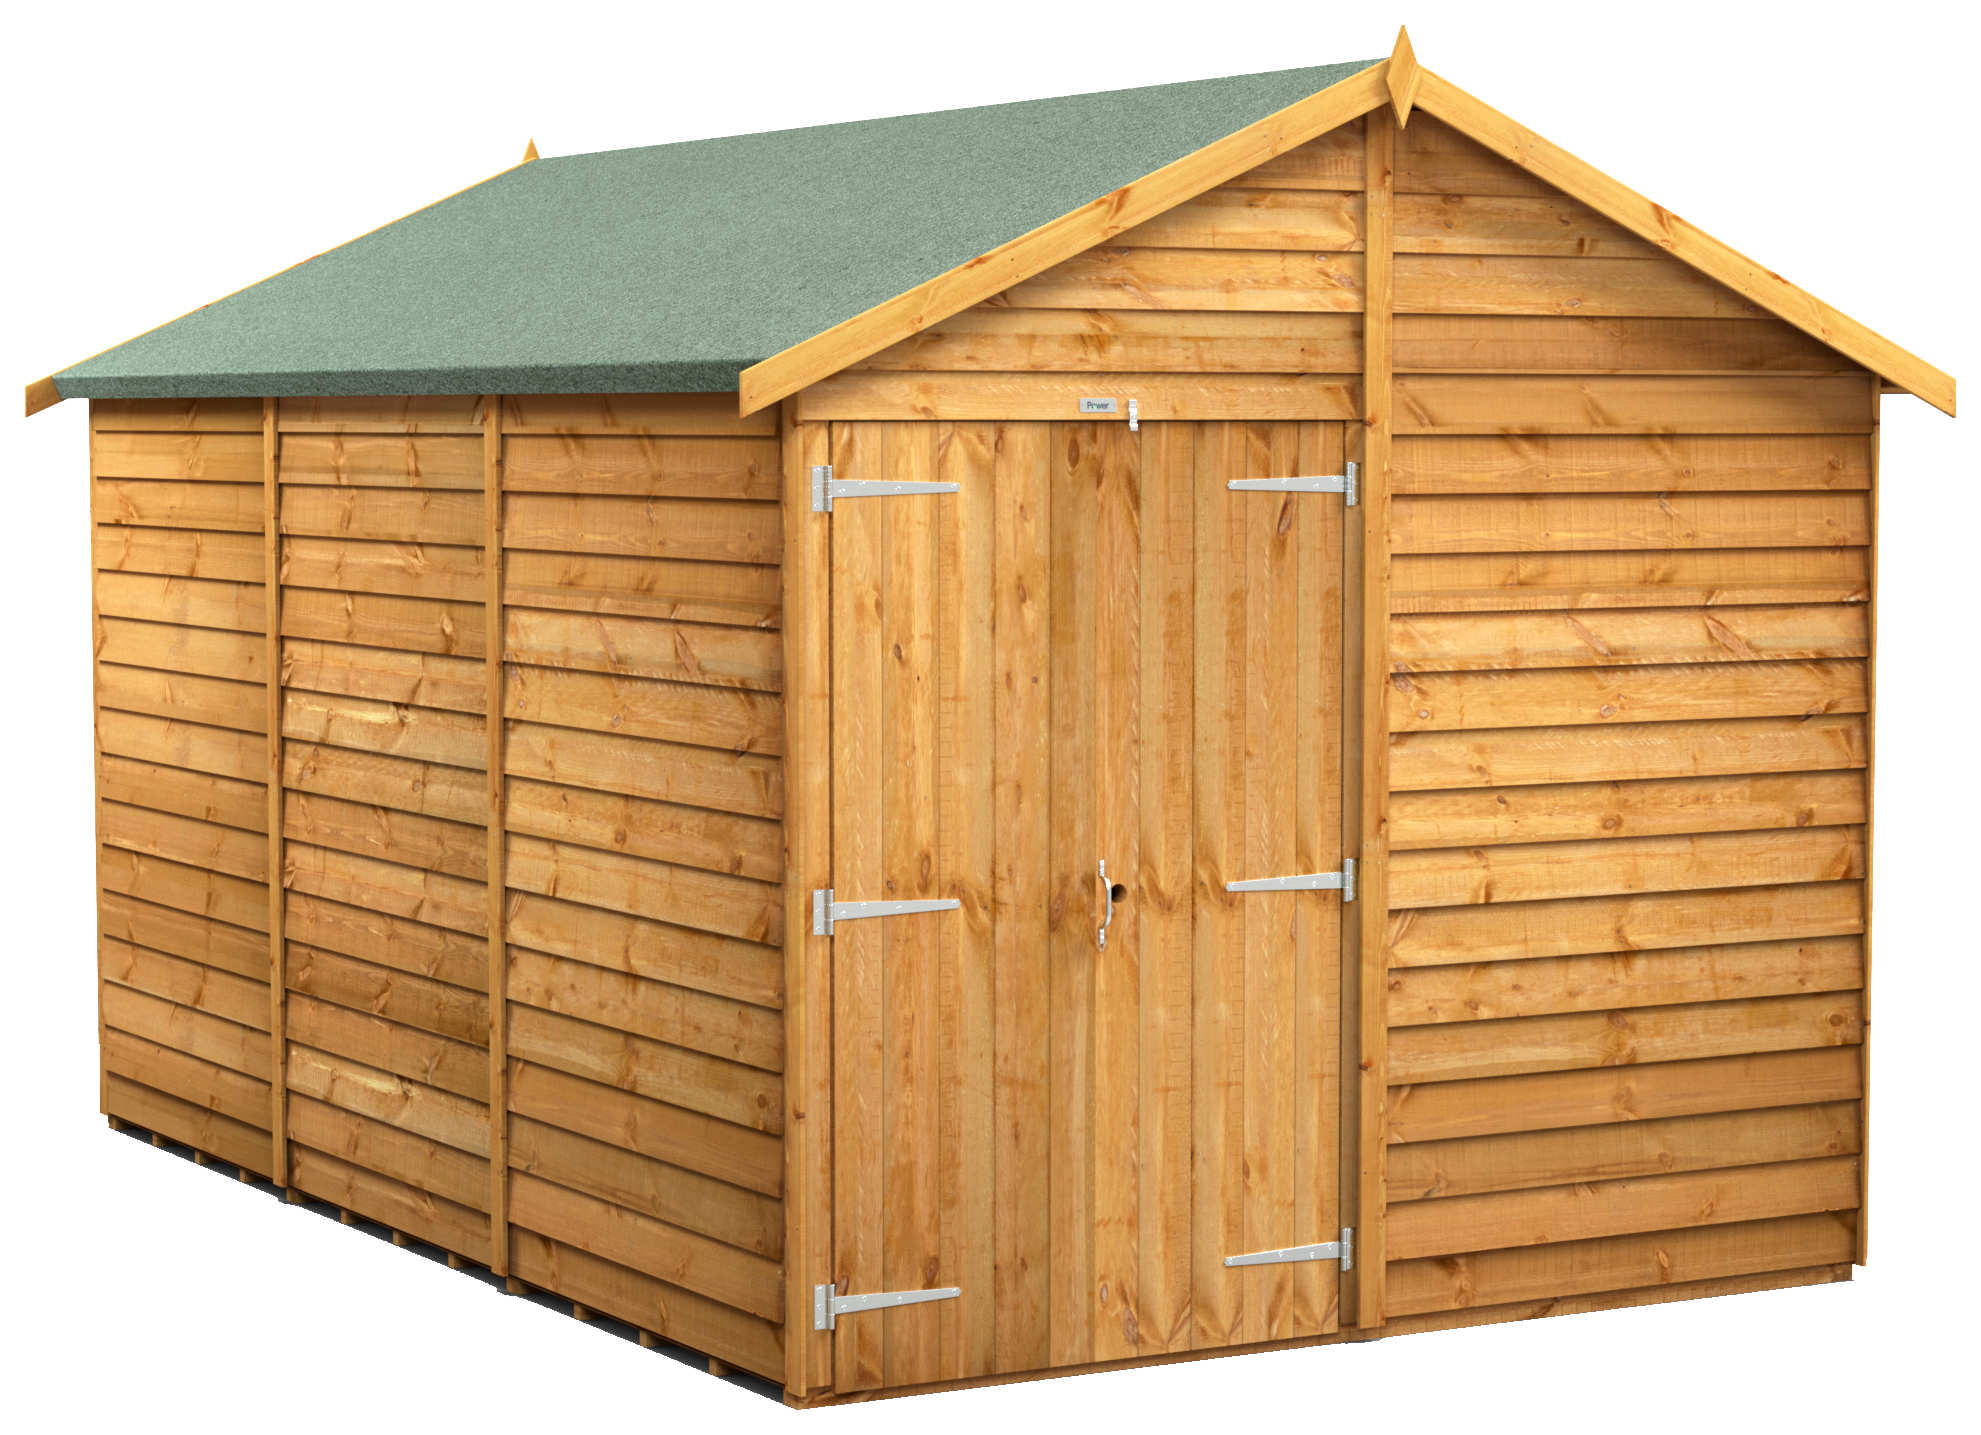 Power Sheds Double Door Apex Overlap Dip Treated Windowless Shed - 12 x 8ft